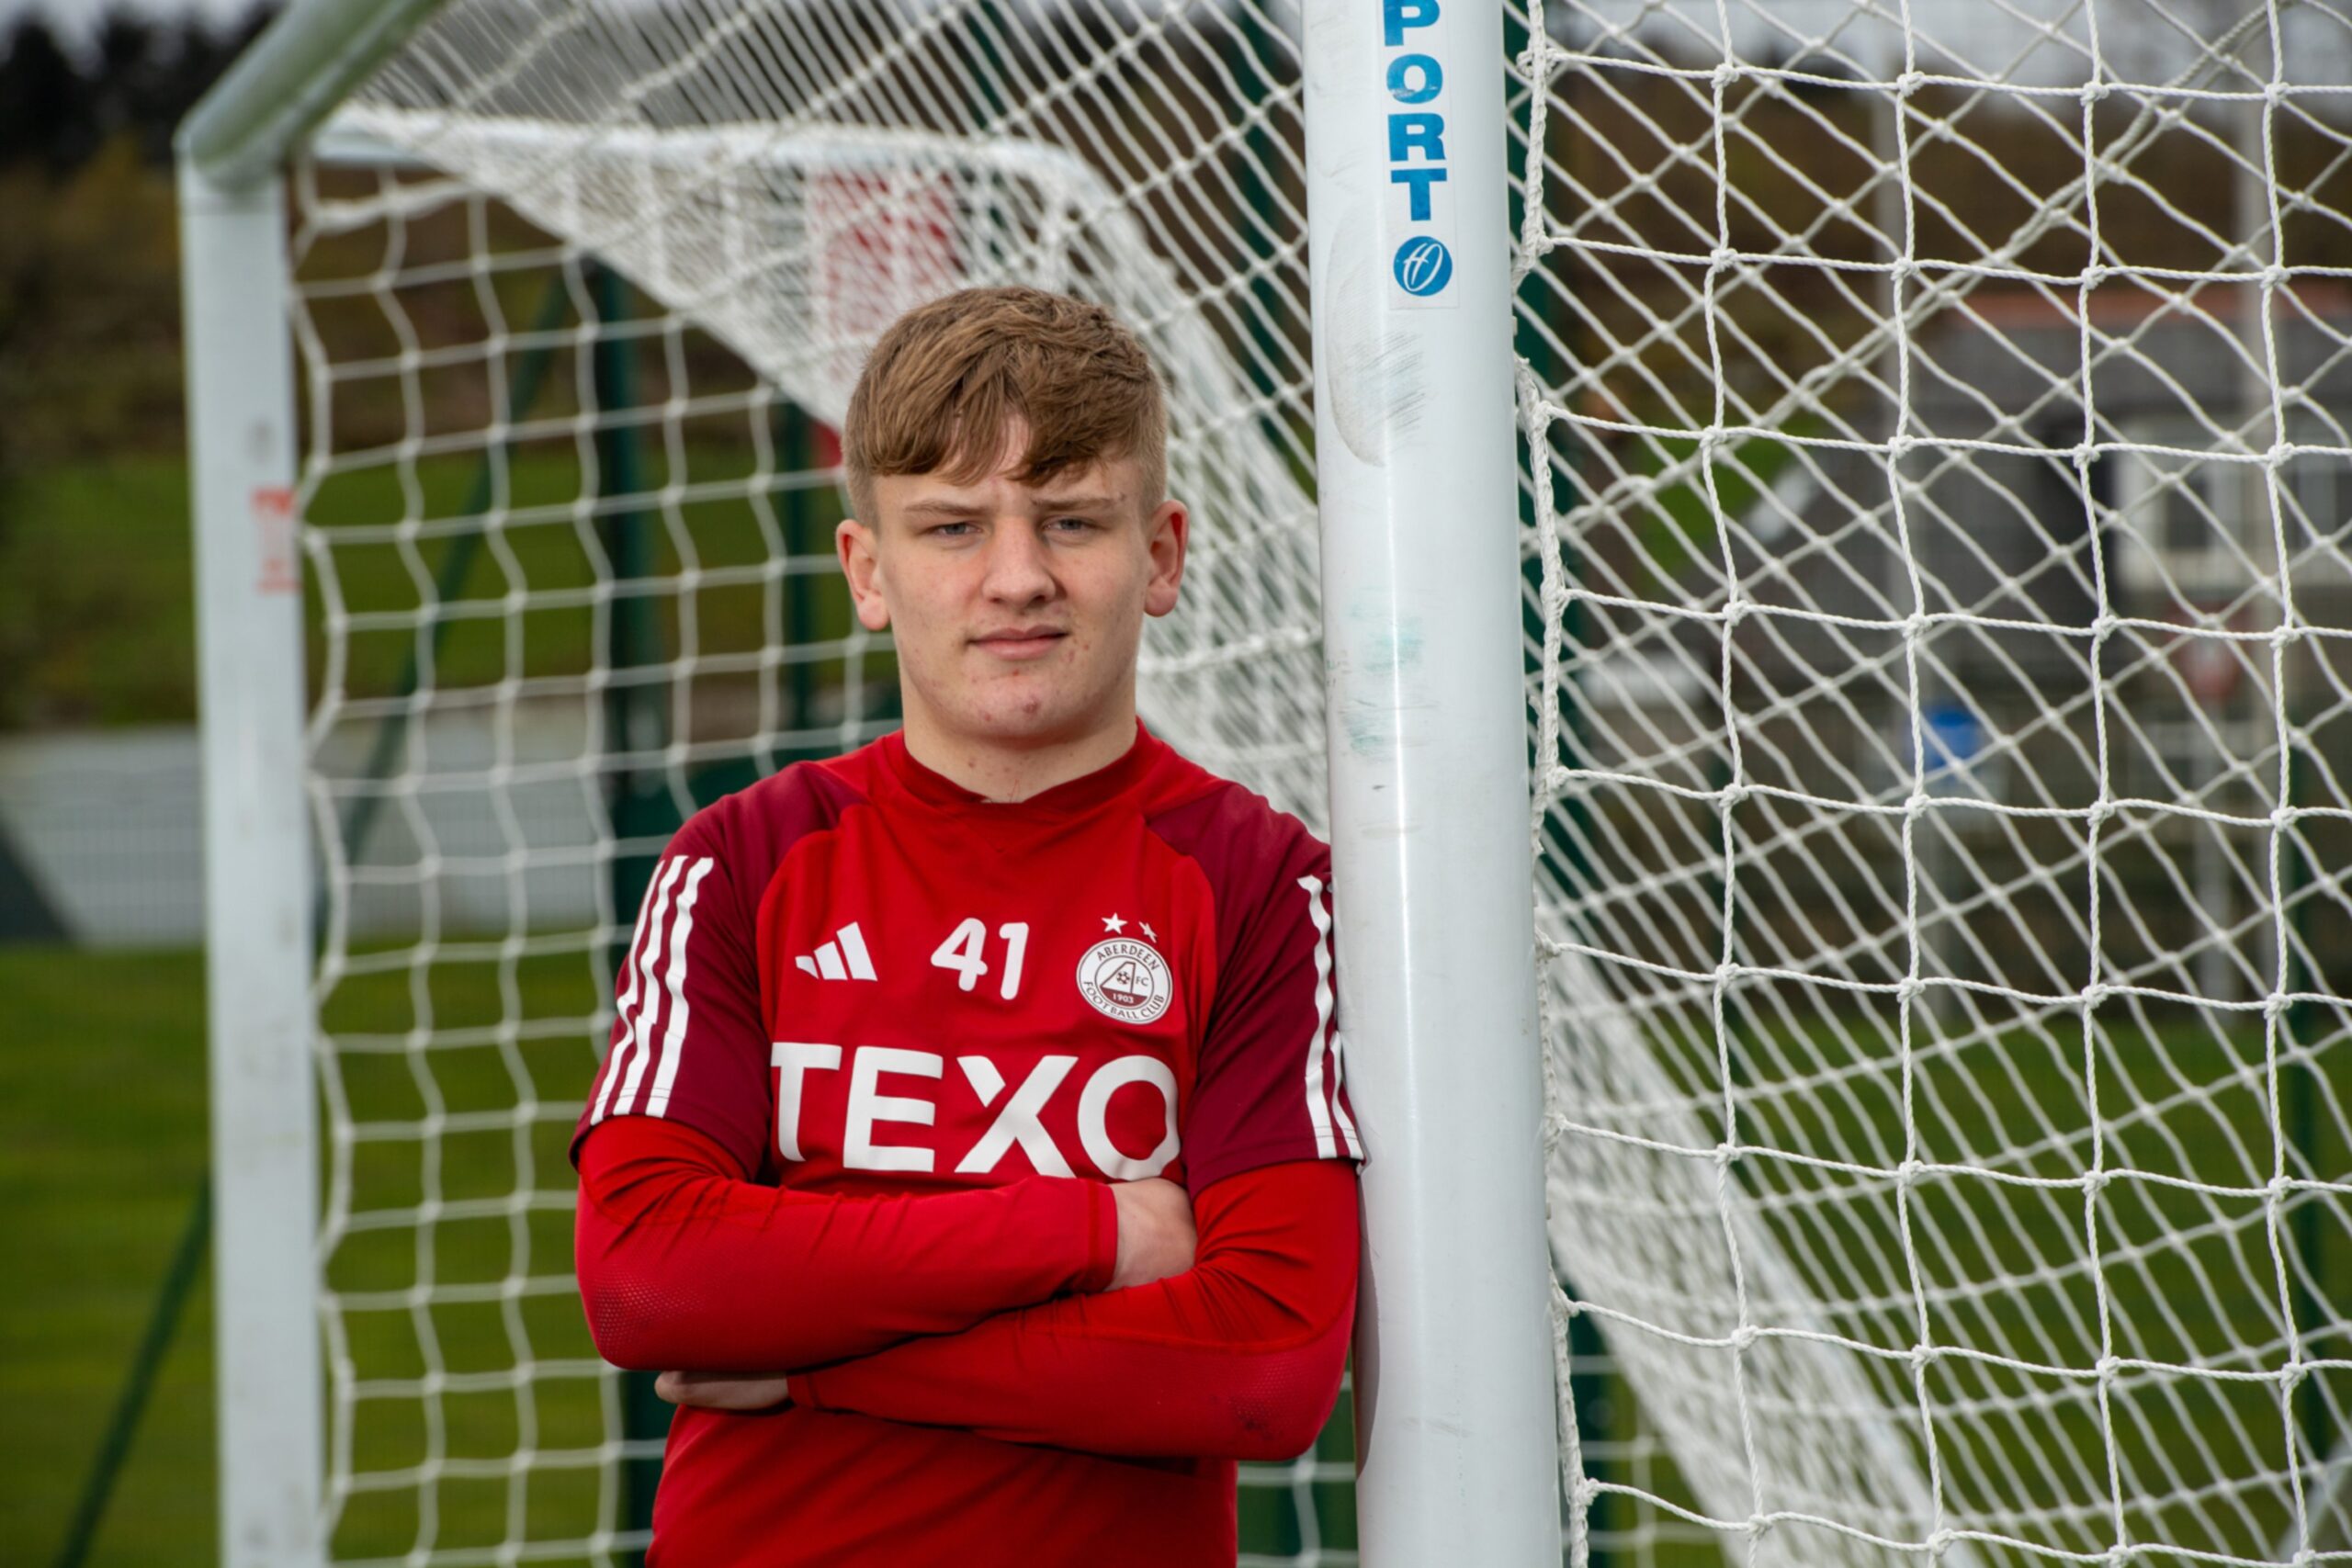 Aberdeen U18 captain Alfie Stewart ahead of the Scottish Youth Cup final at Hampden. Image: Kenny Elrick/DC Thomson